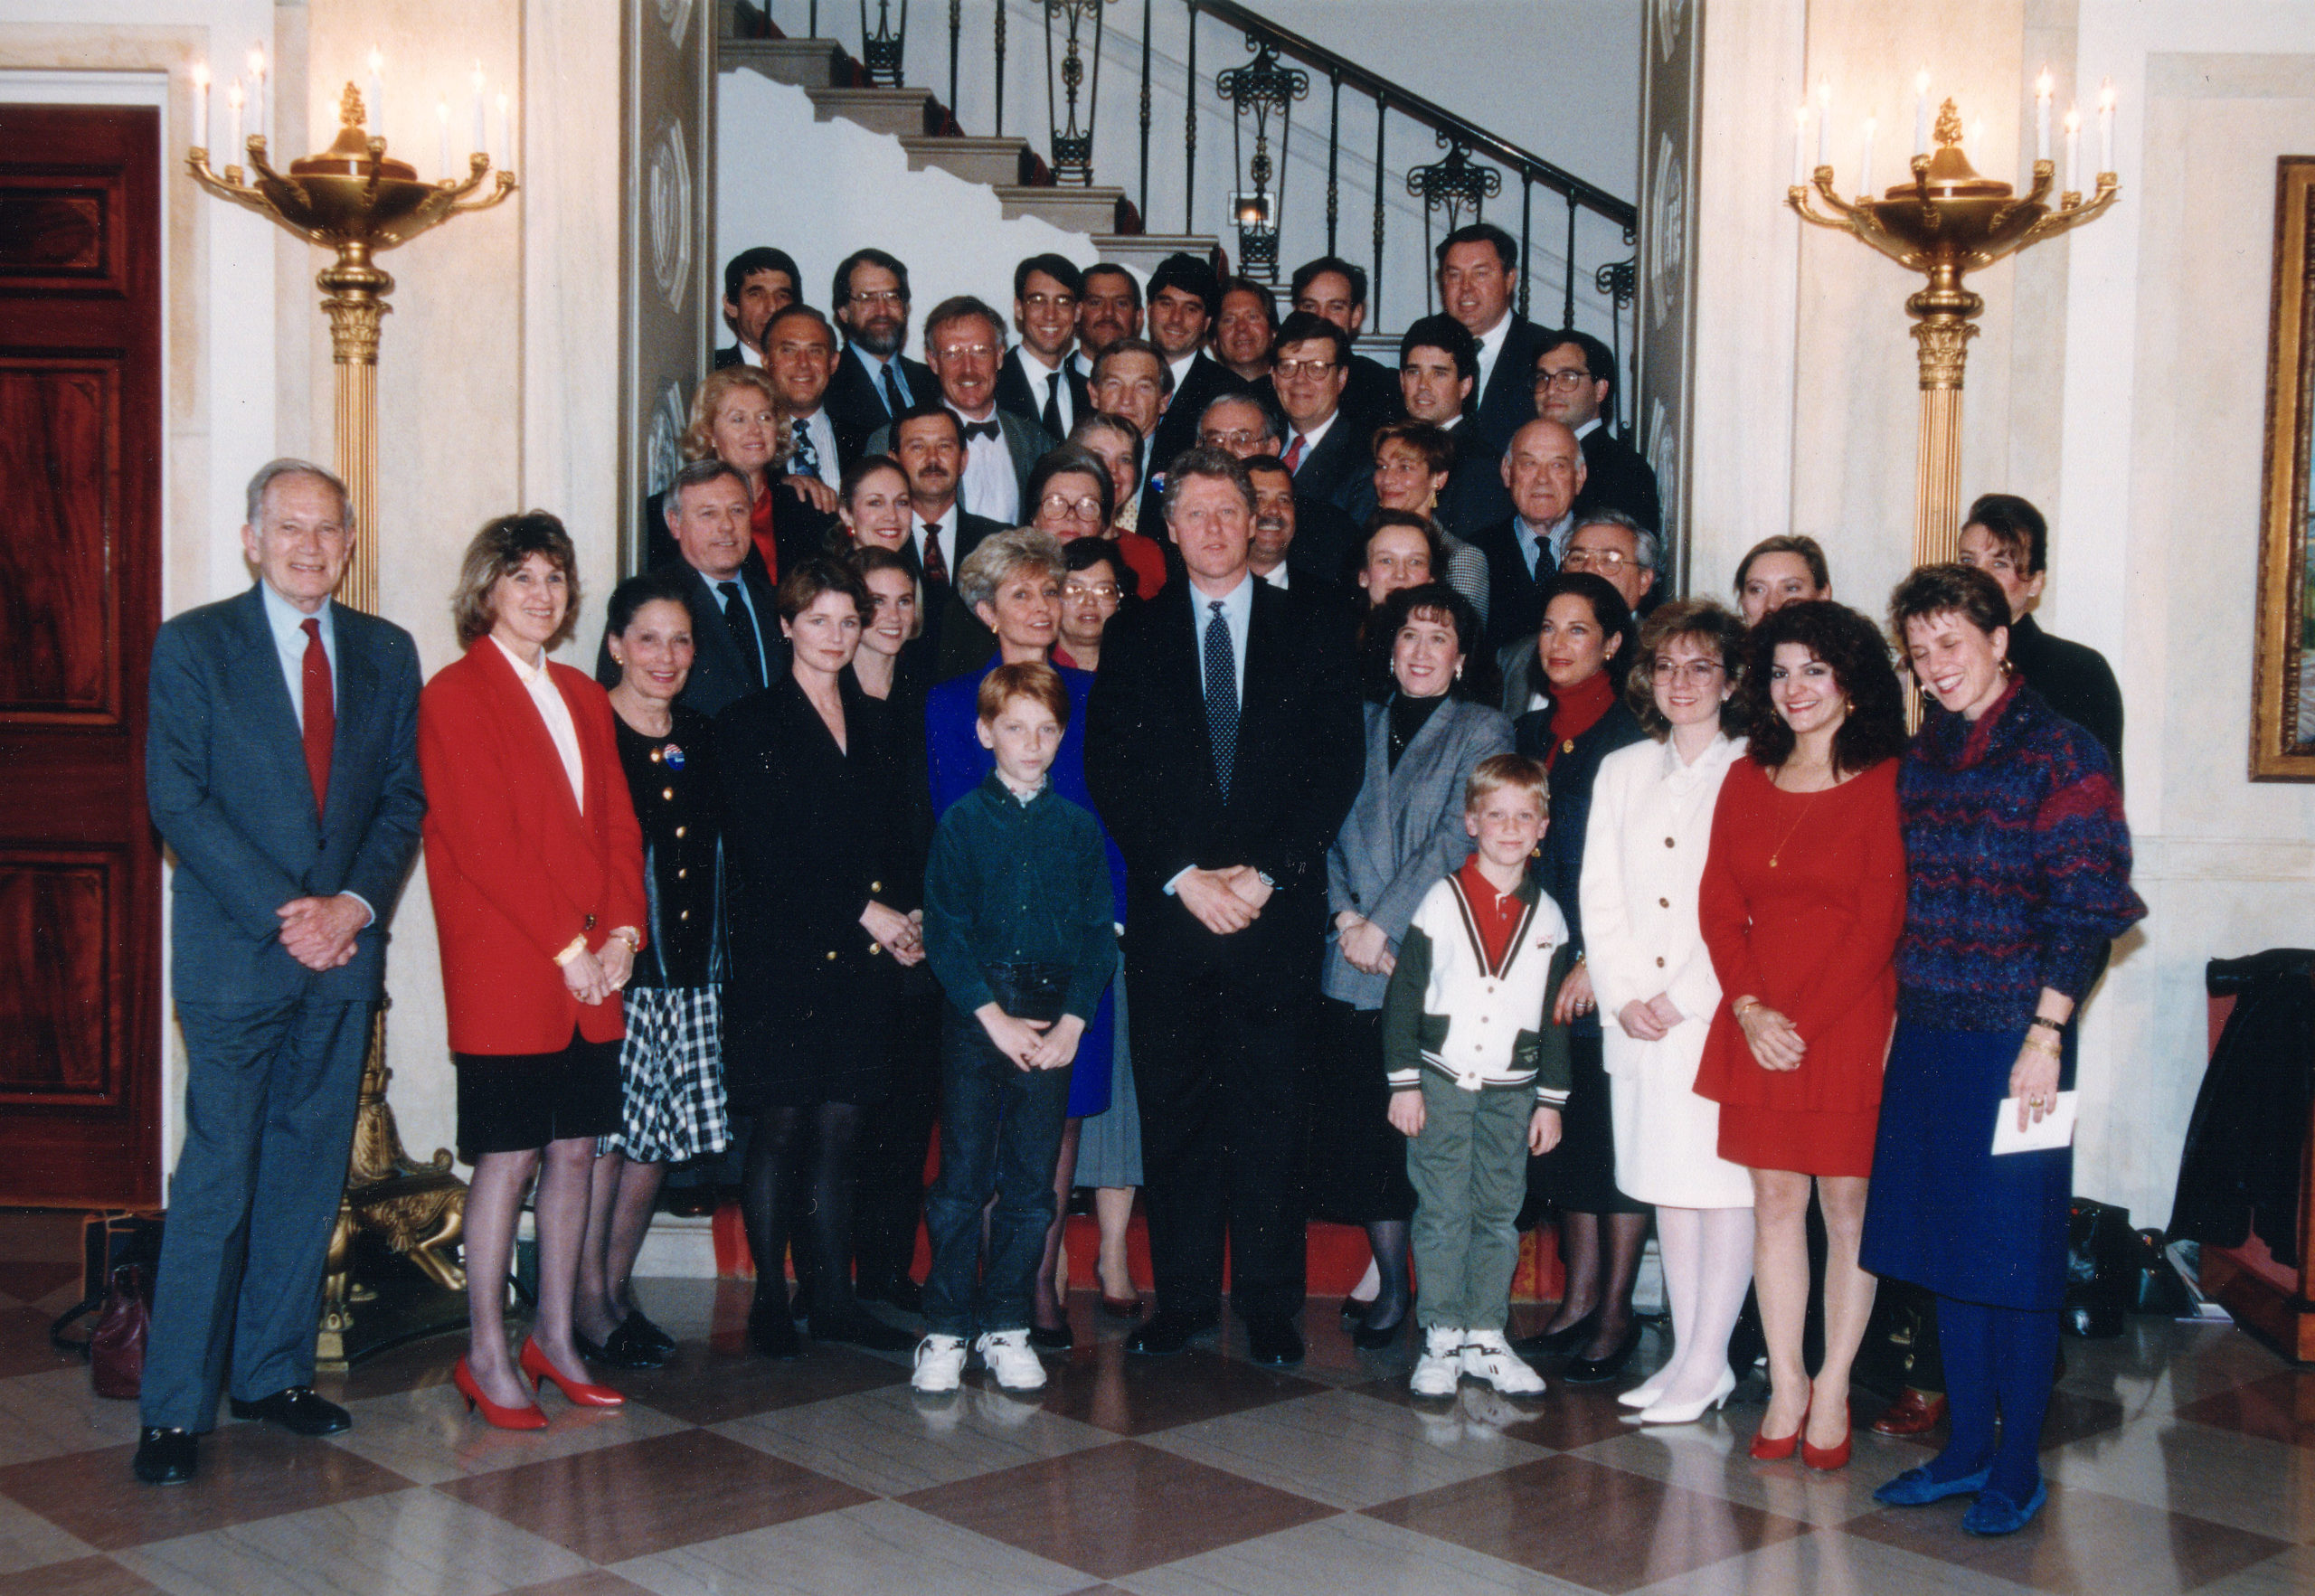 Clinton with Wine Institute Members in 1993